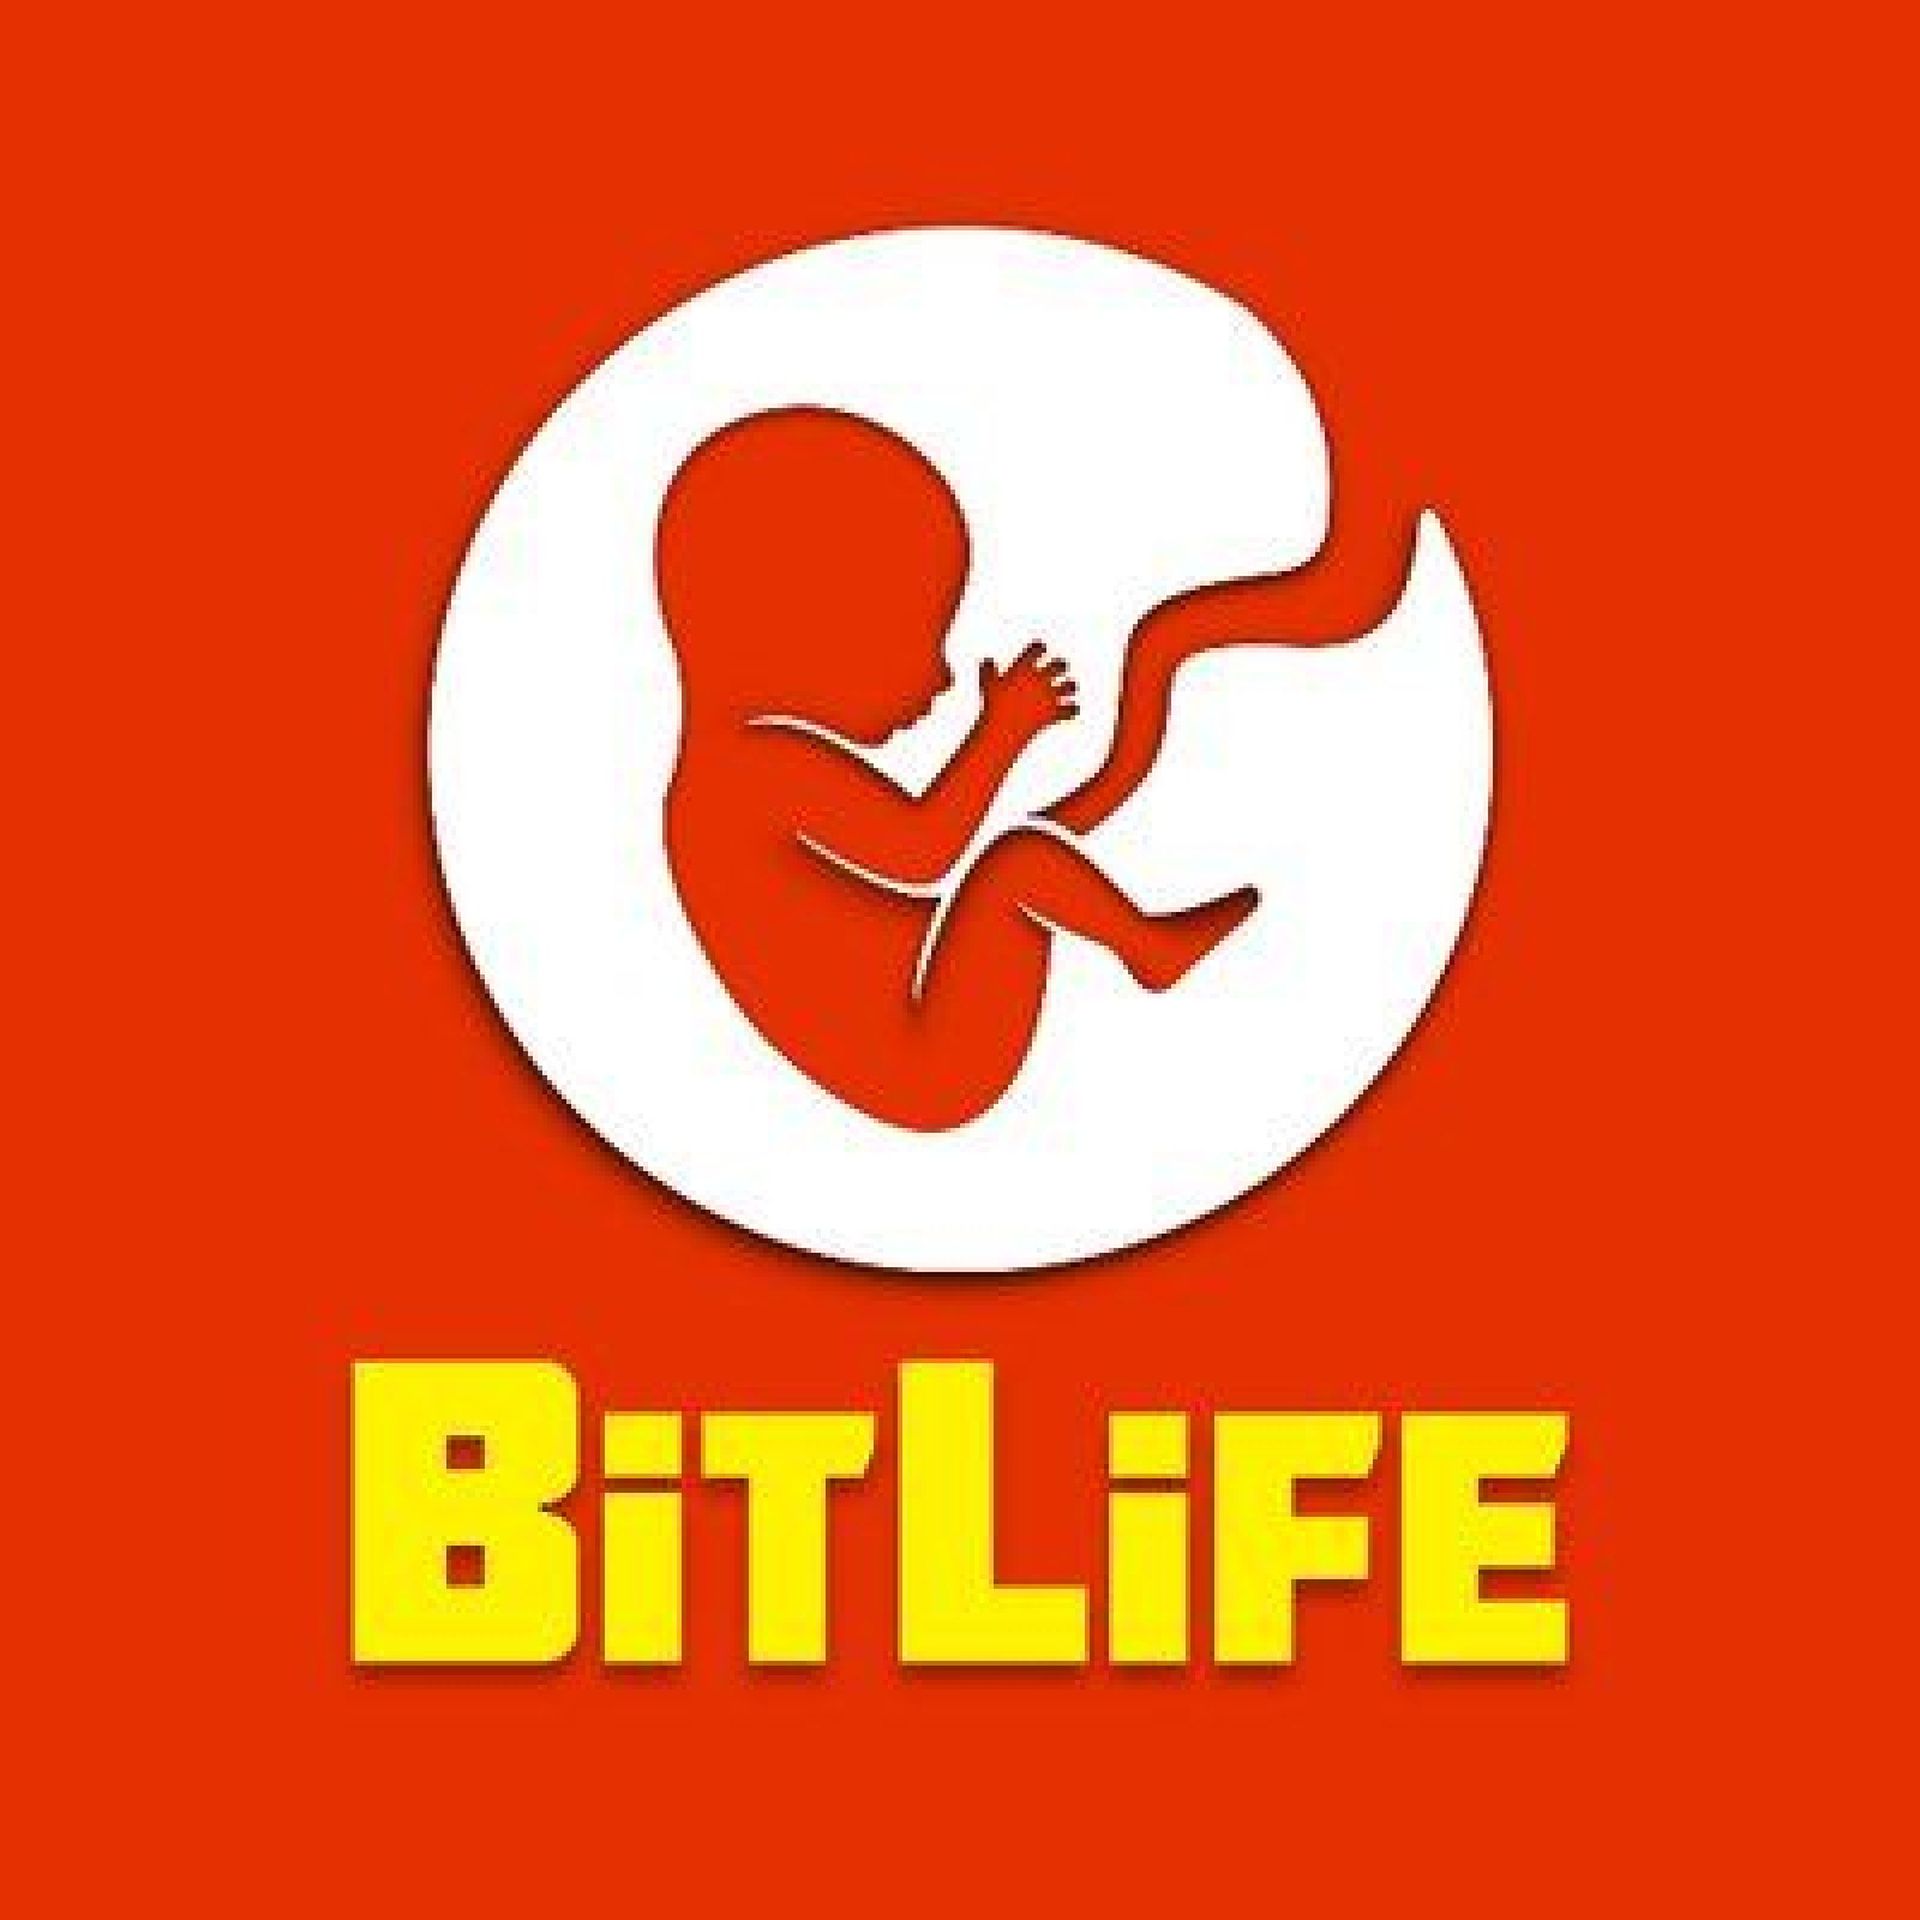 Explained: How to have twins in BitLife?